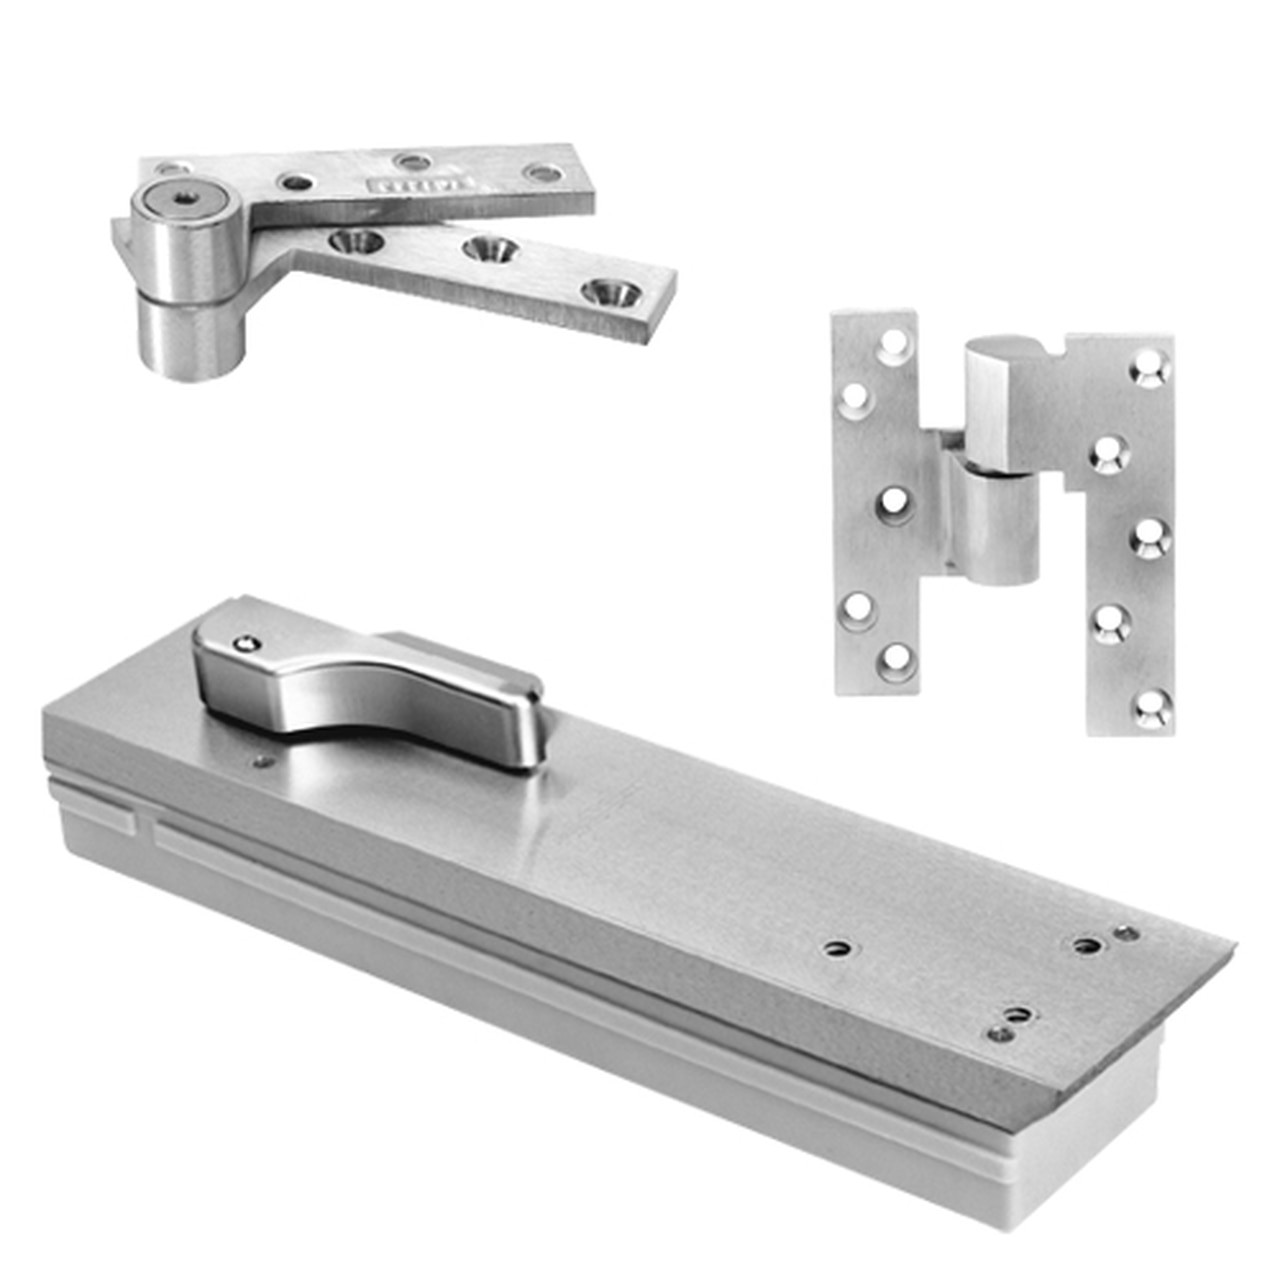 FQ5105NBC-LFP-LTP-LH-625 Rixson Q51 Series Fire Rated 3/4" Offset Hung Shallow Depth Floor Closers in Bright Chrome Finish